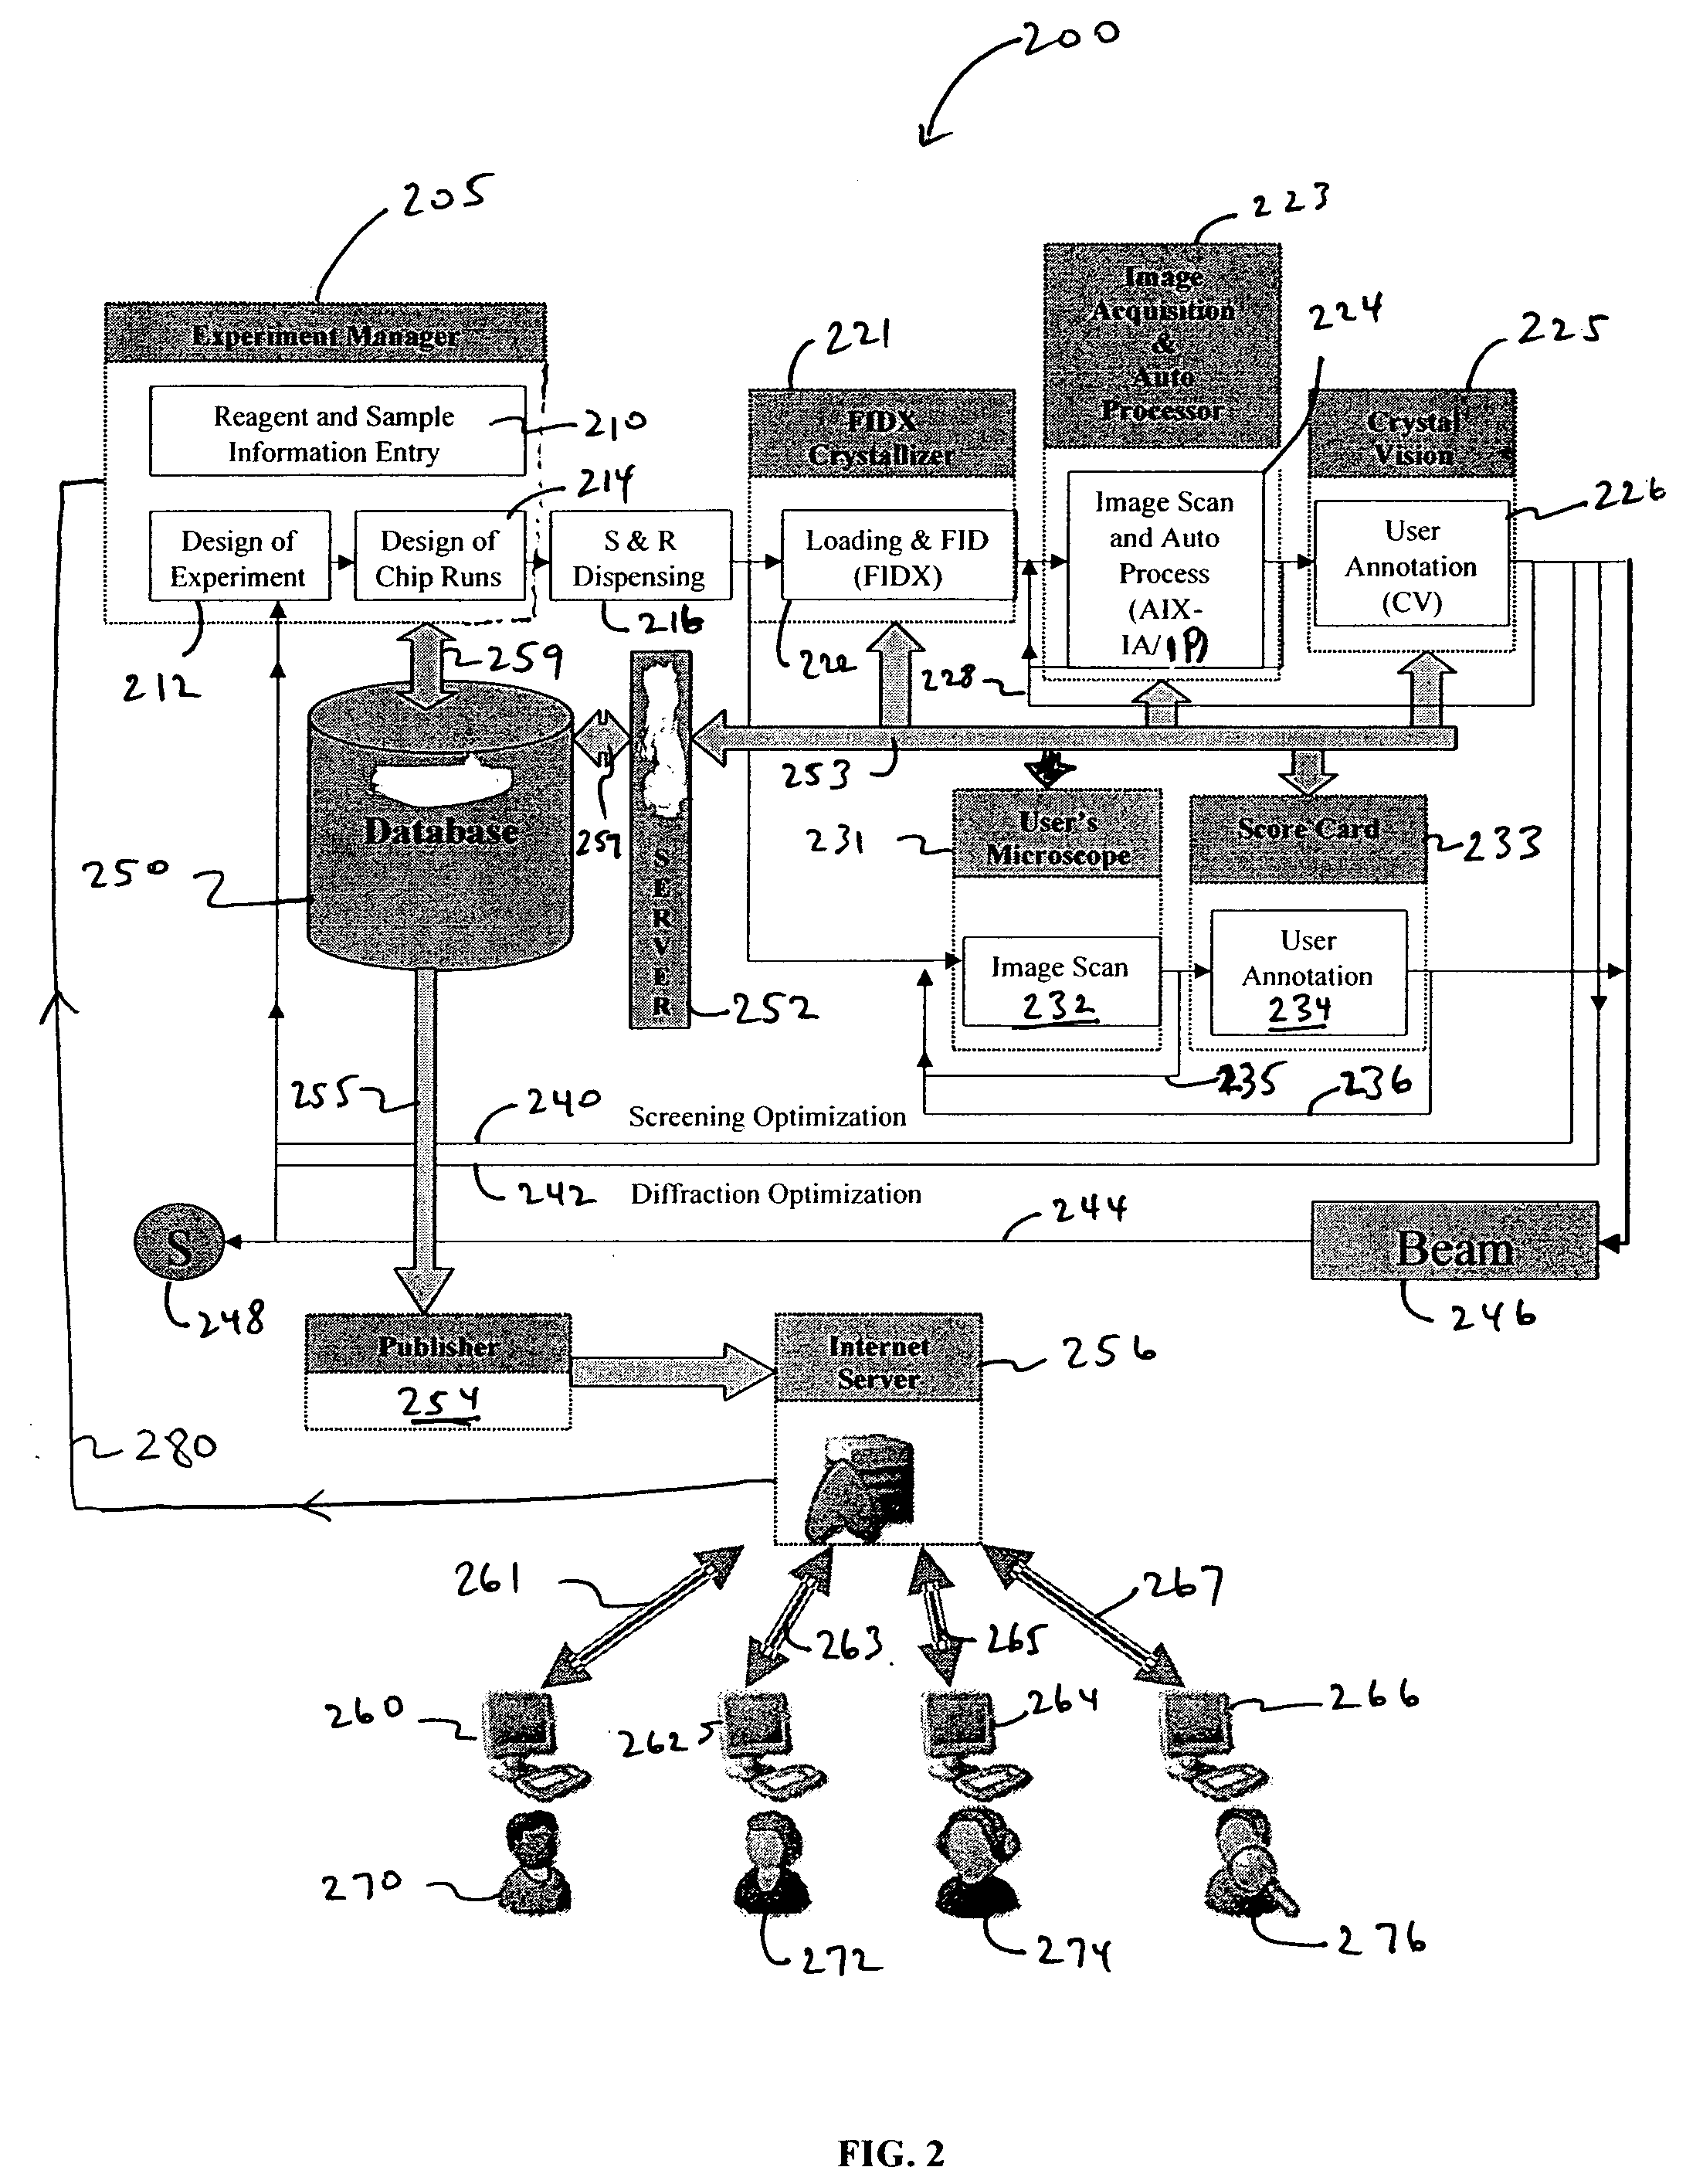 Analysis engine and database for manipulating parameters for fluidic systems on a chip